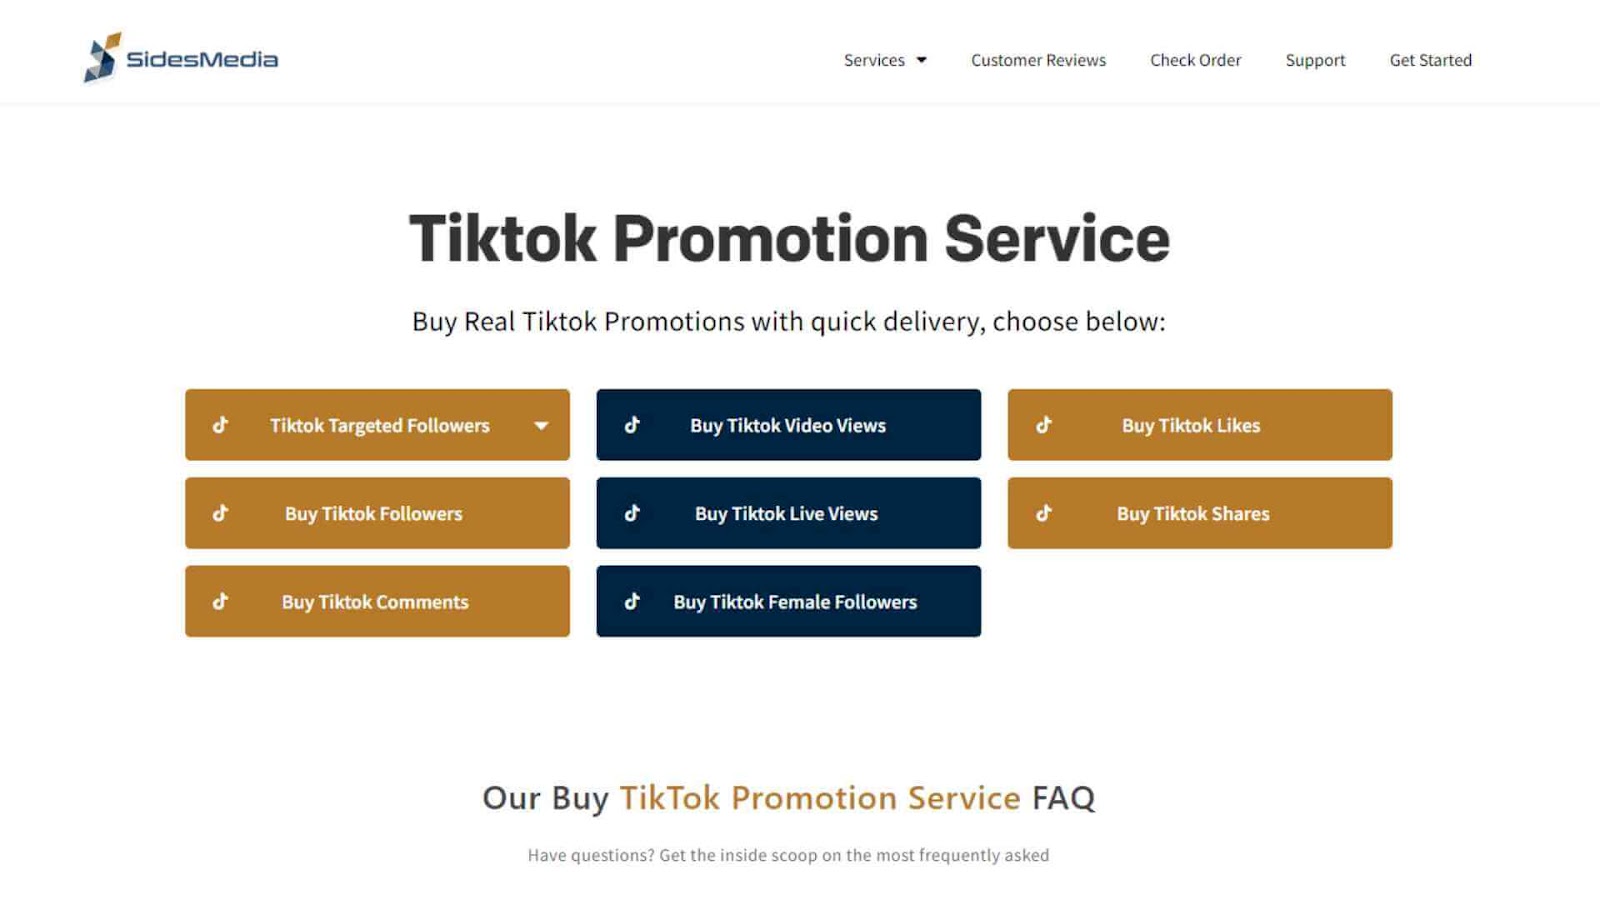 A web page from SidesMedia advertising different TikTok promotion services such as followers, views, and likes.